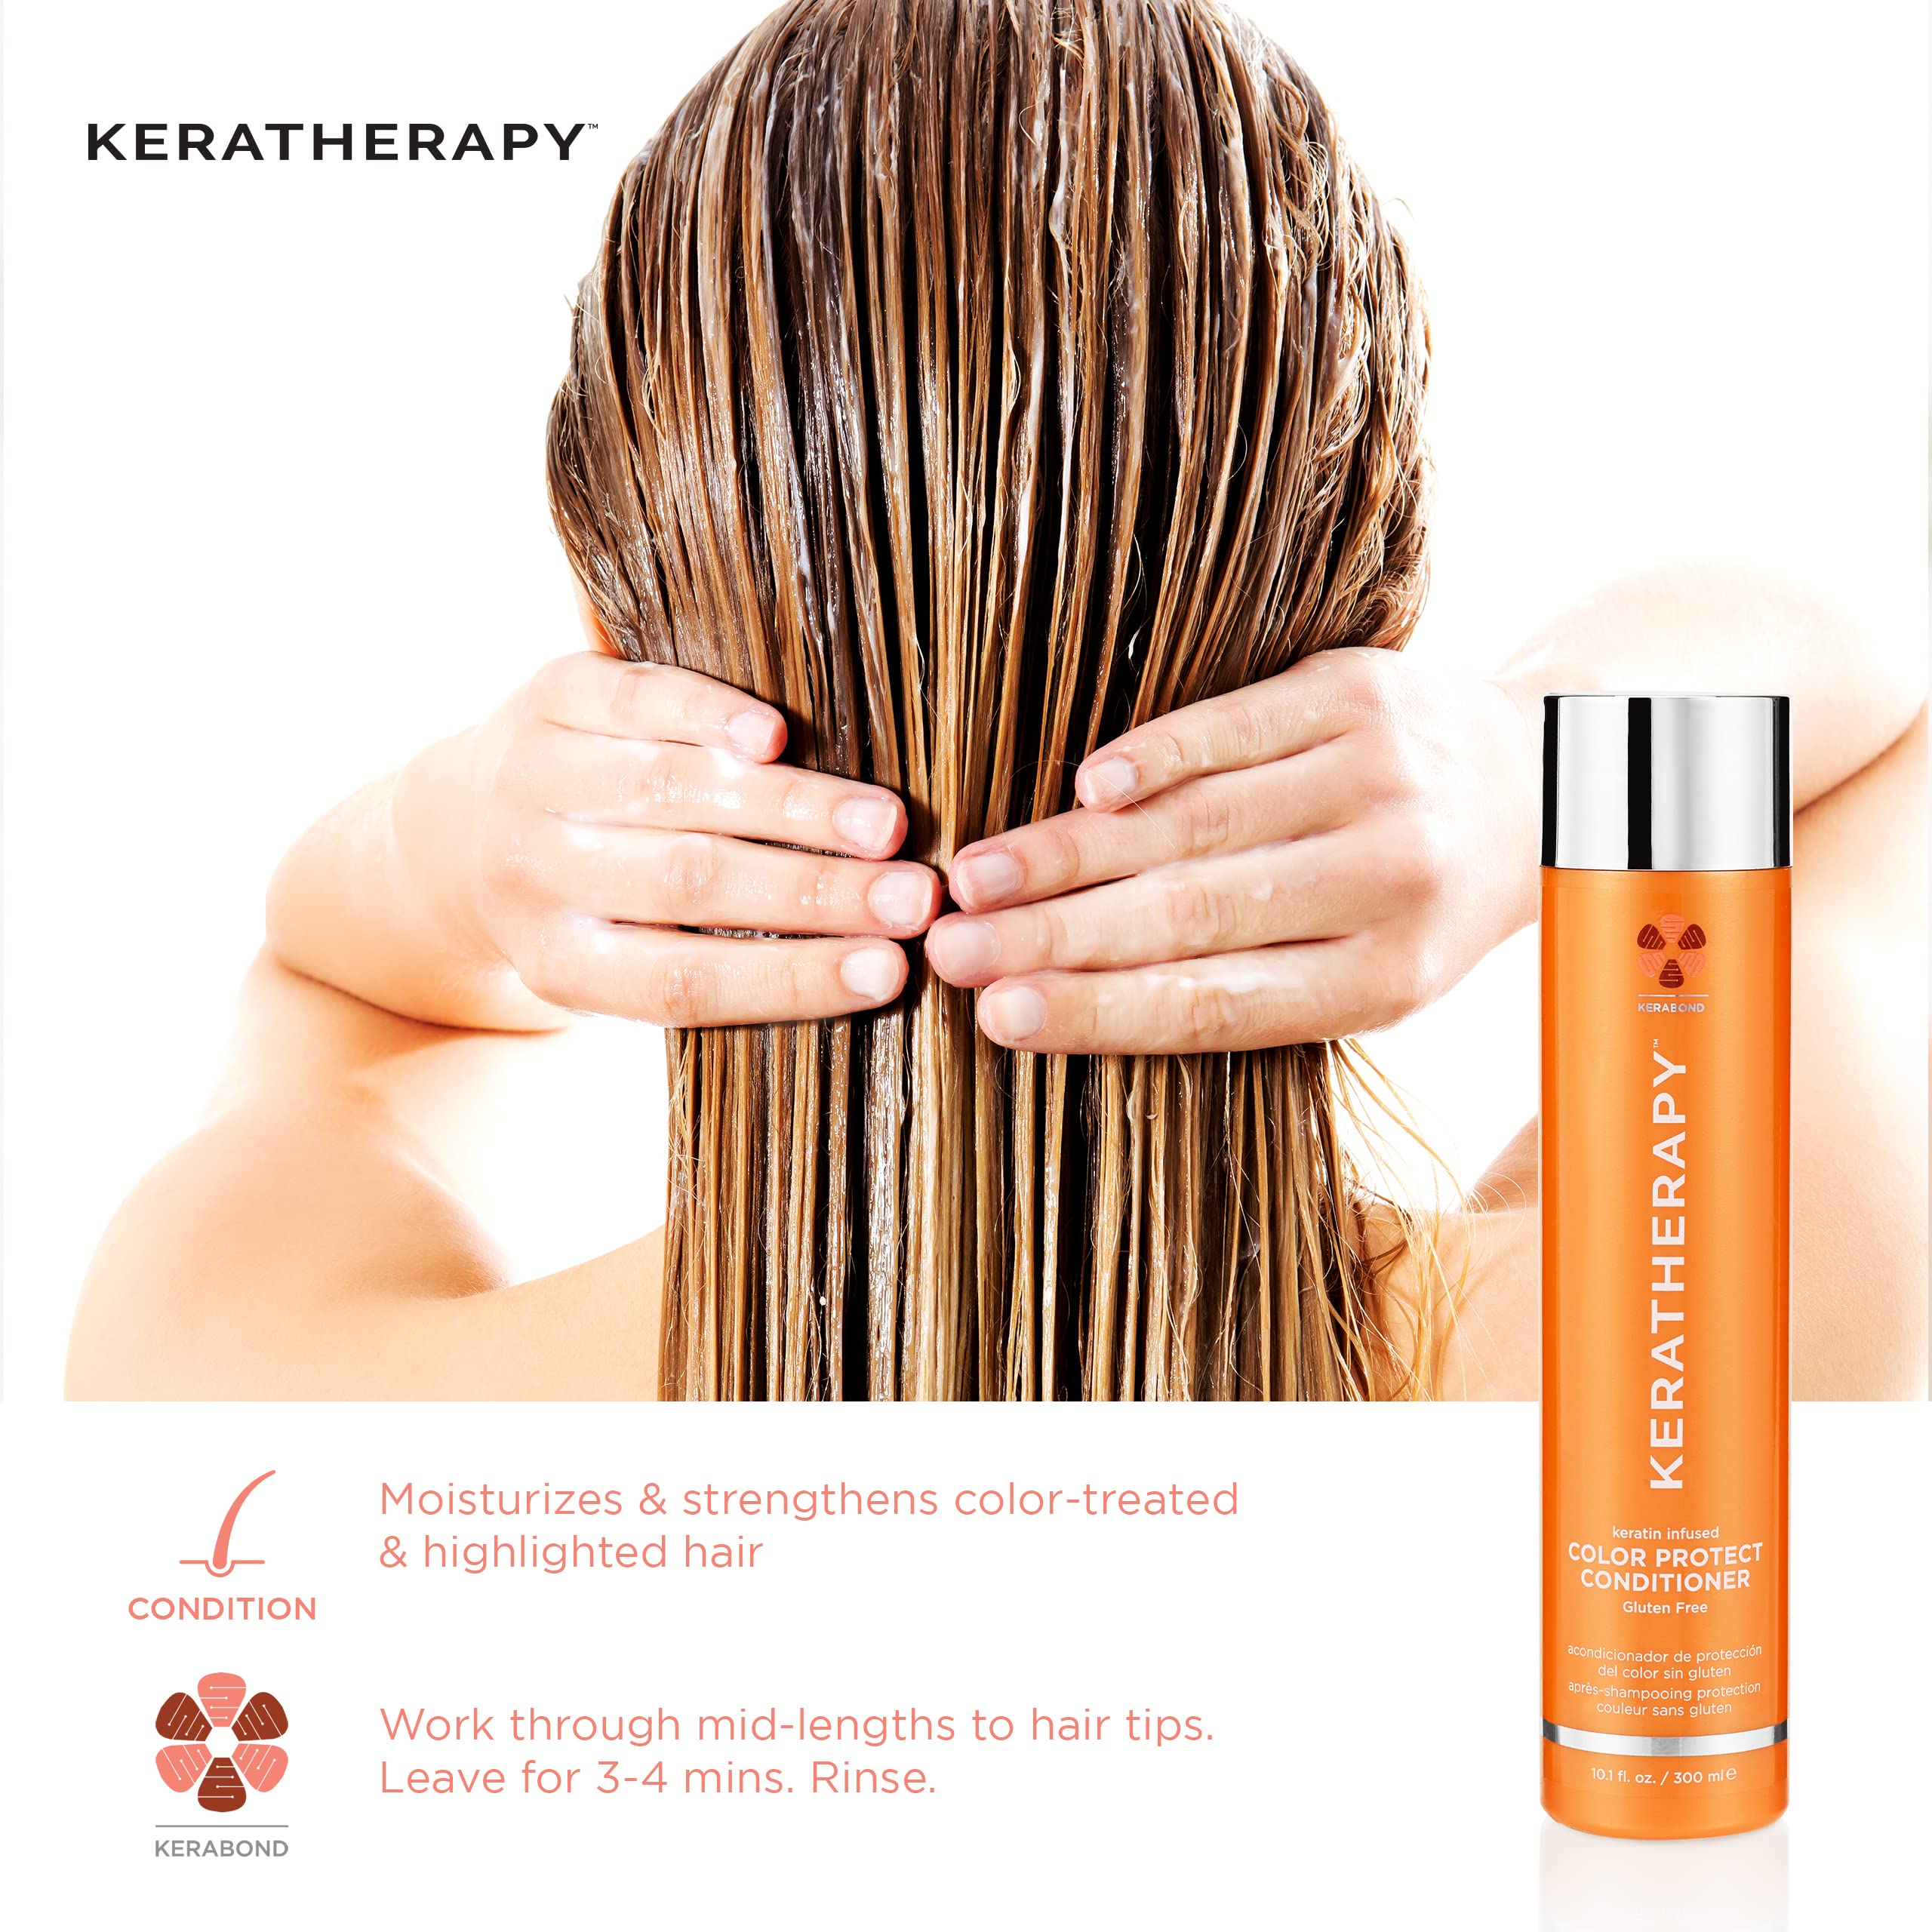 KERATHERAPY Keratin Infused Color Protect Shampoo, 33.8 fl. oz., 1000 ml - Gluten Free Color Protecting Shampoo for Color Treated Hair with Kerabond Technology, Red Raspberry Oil, Omega 3 & 6